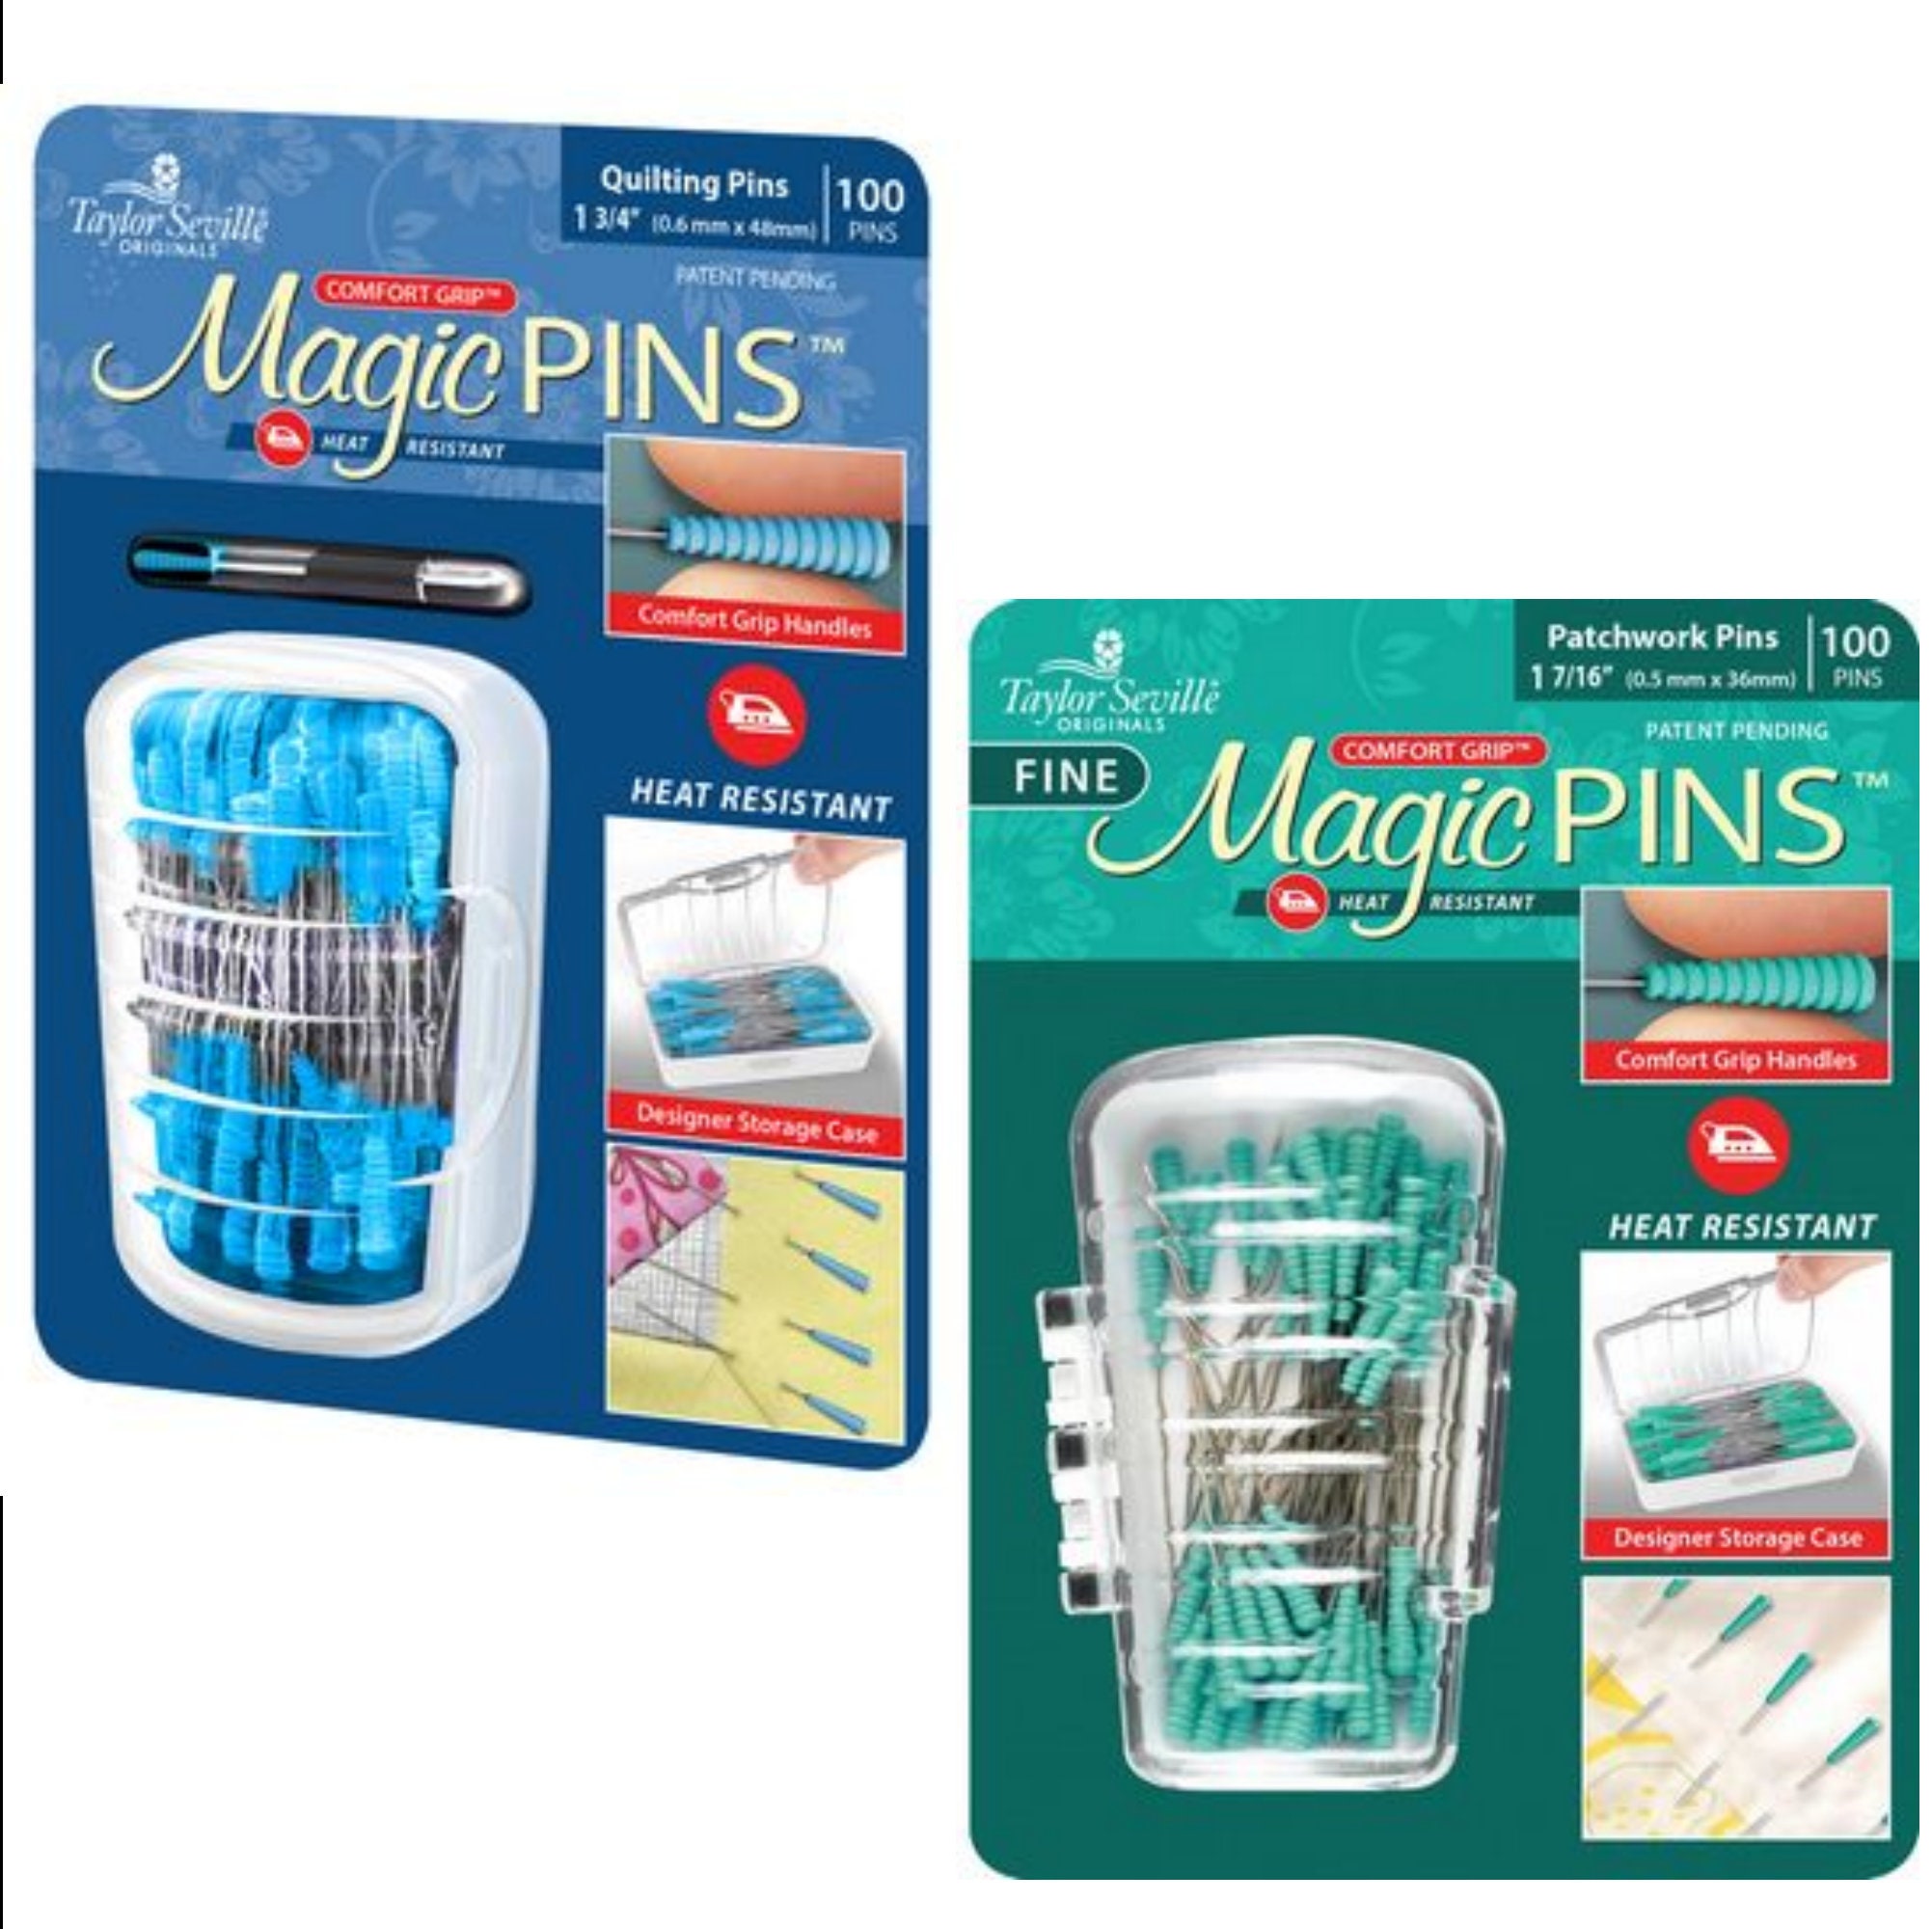 Experience Quilting Magic with Taylor Seville's Magic Pins